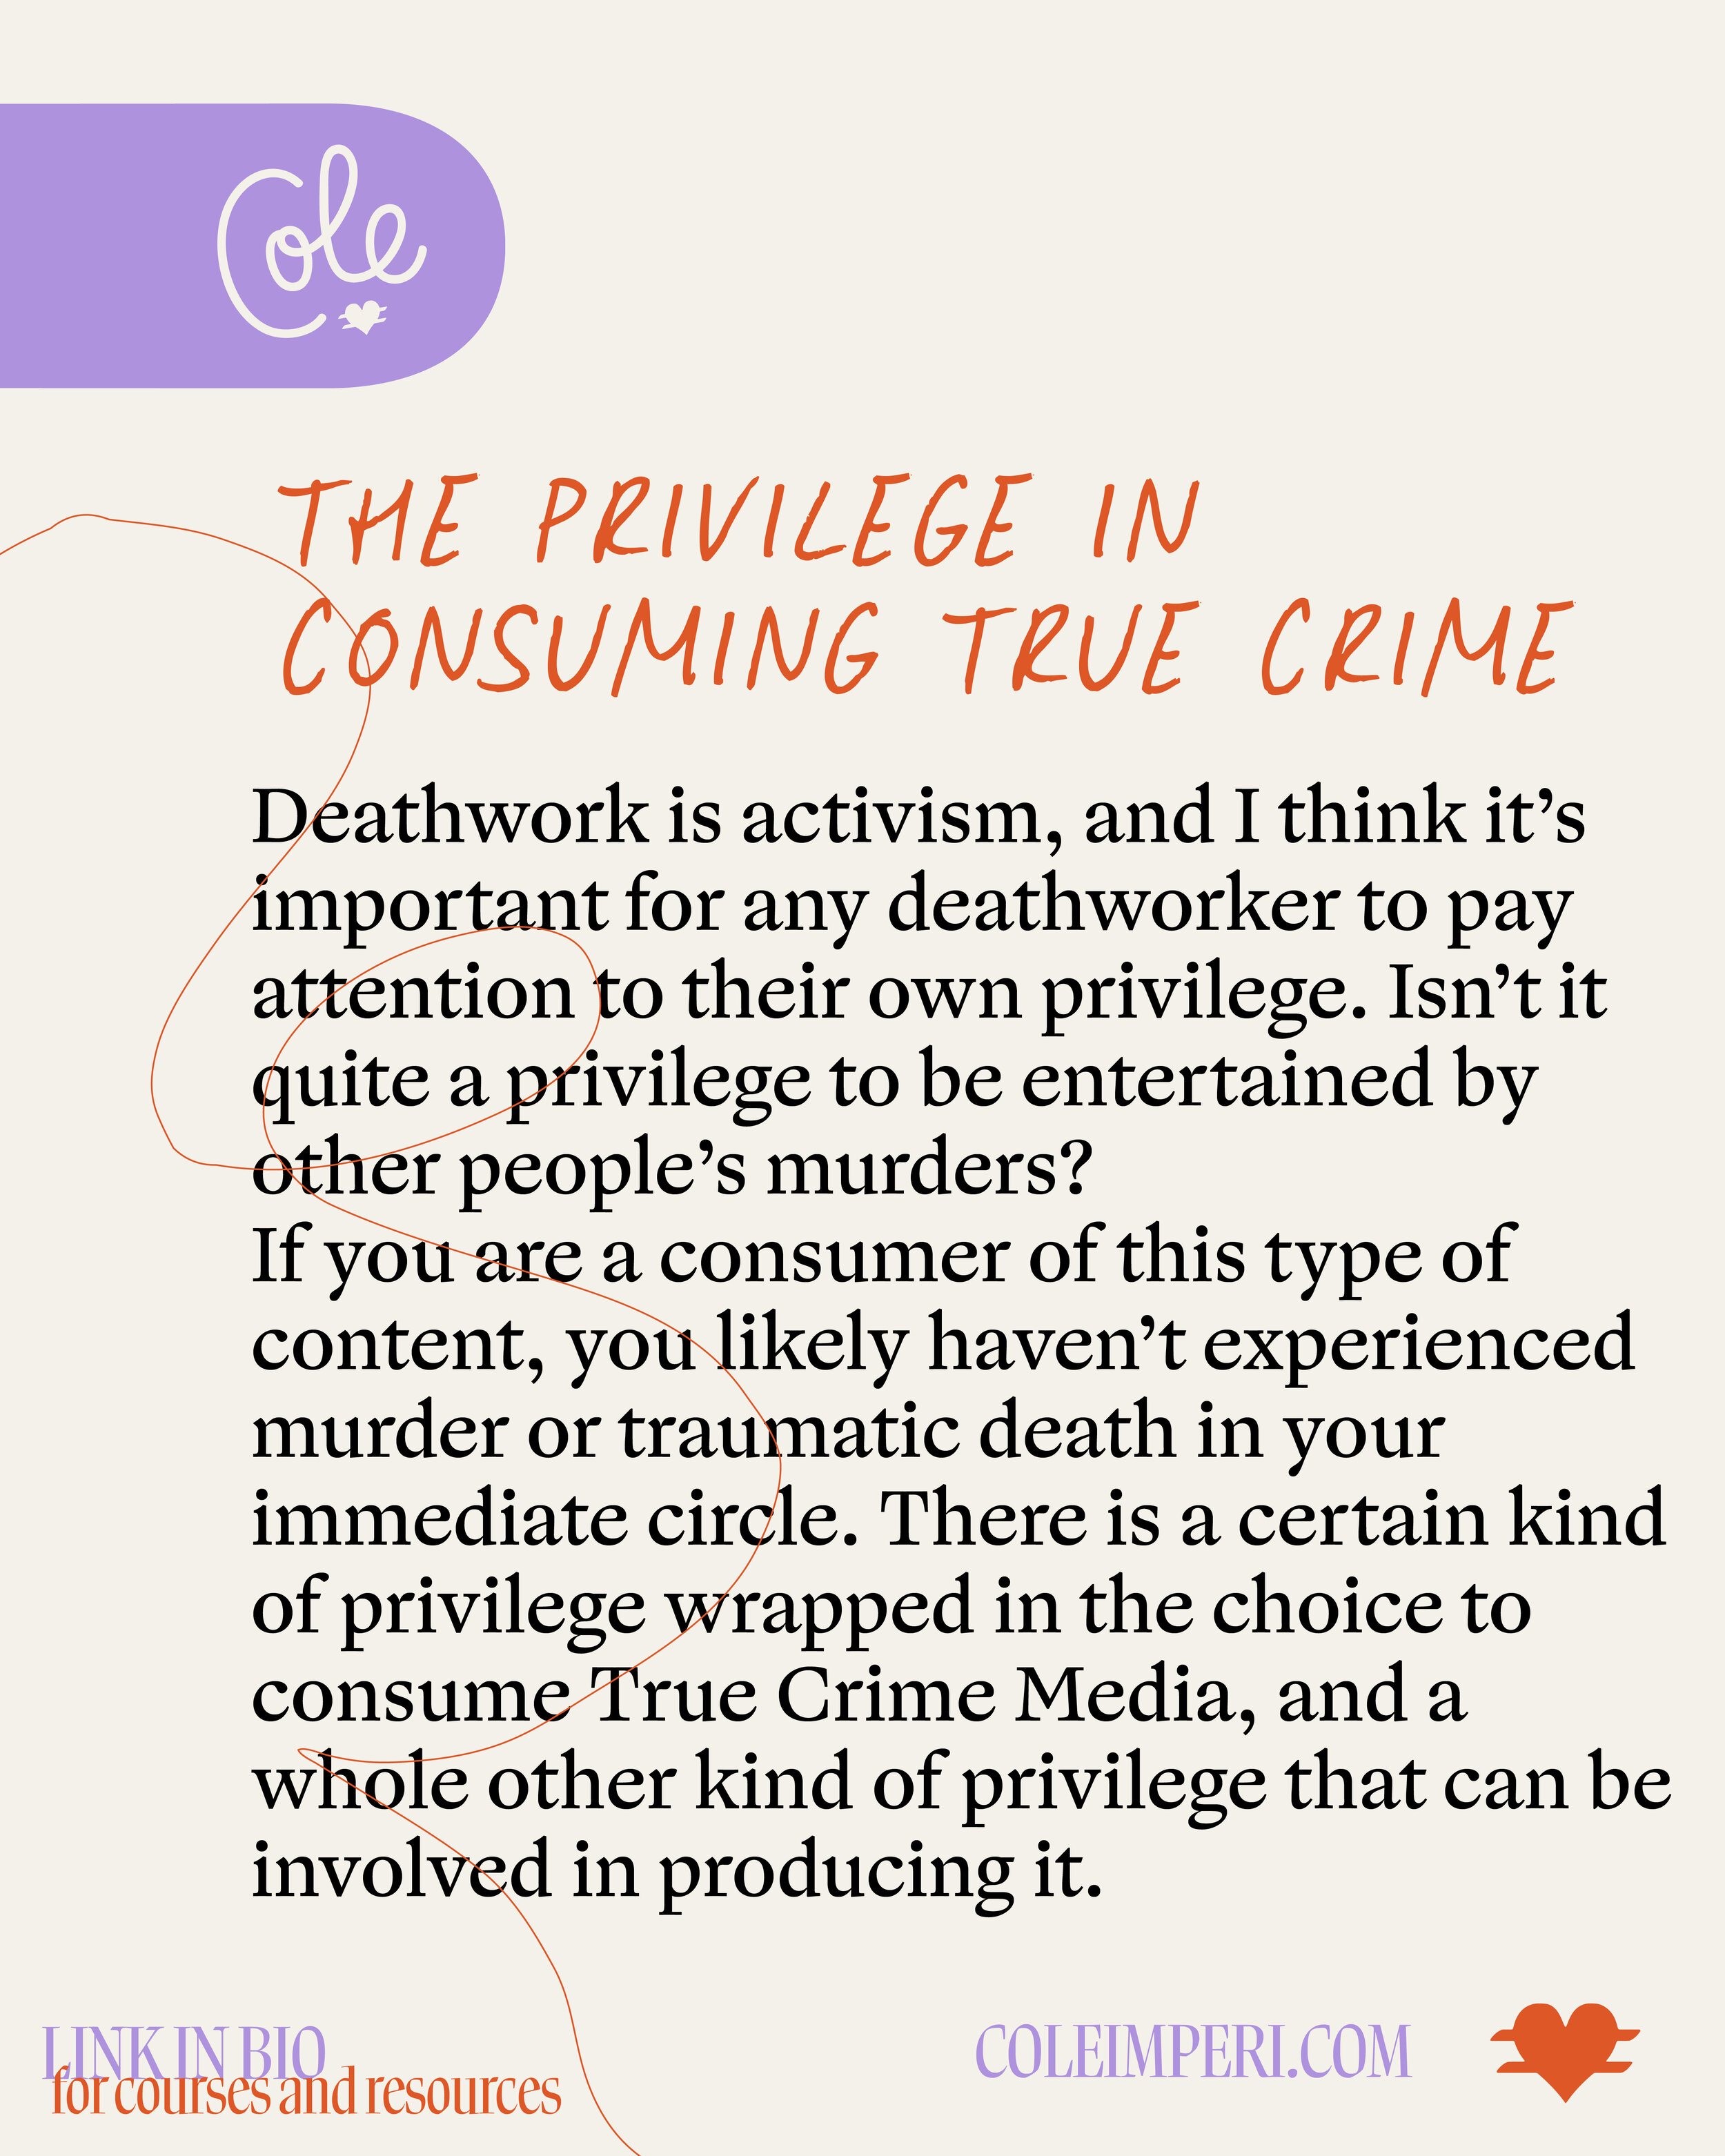 The Ethics of Consuming True Crime Media for Deathworkers Privilege